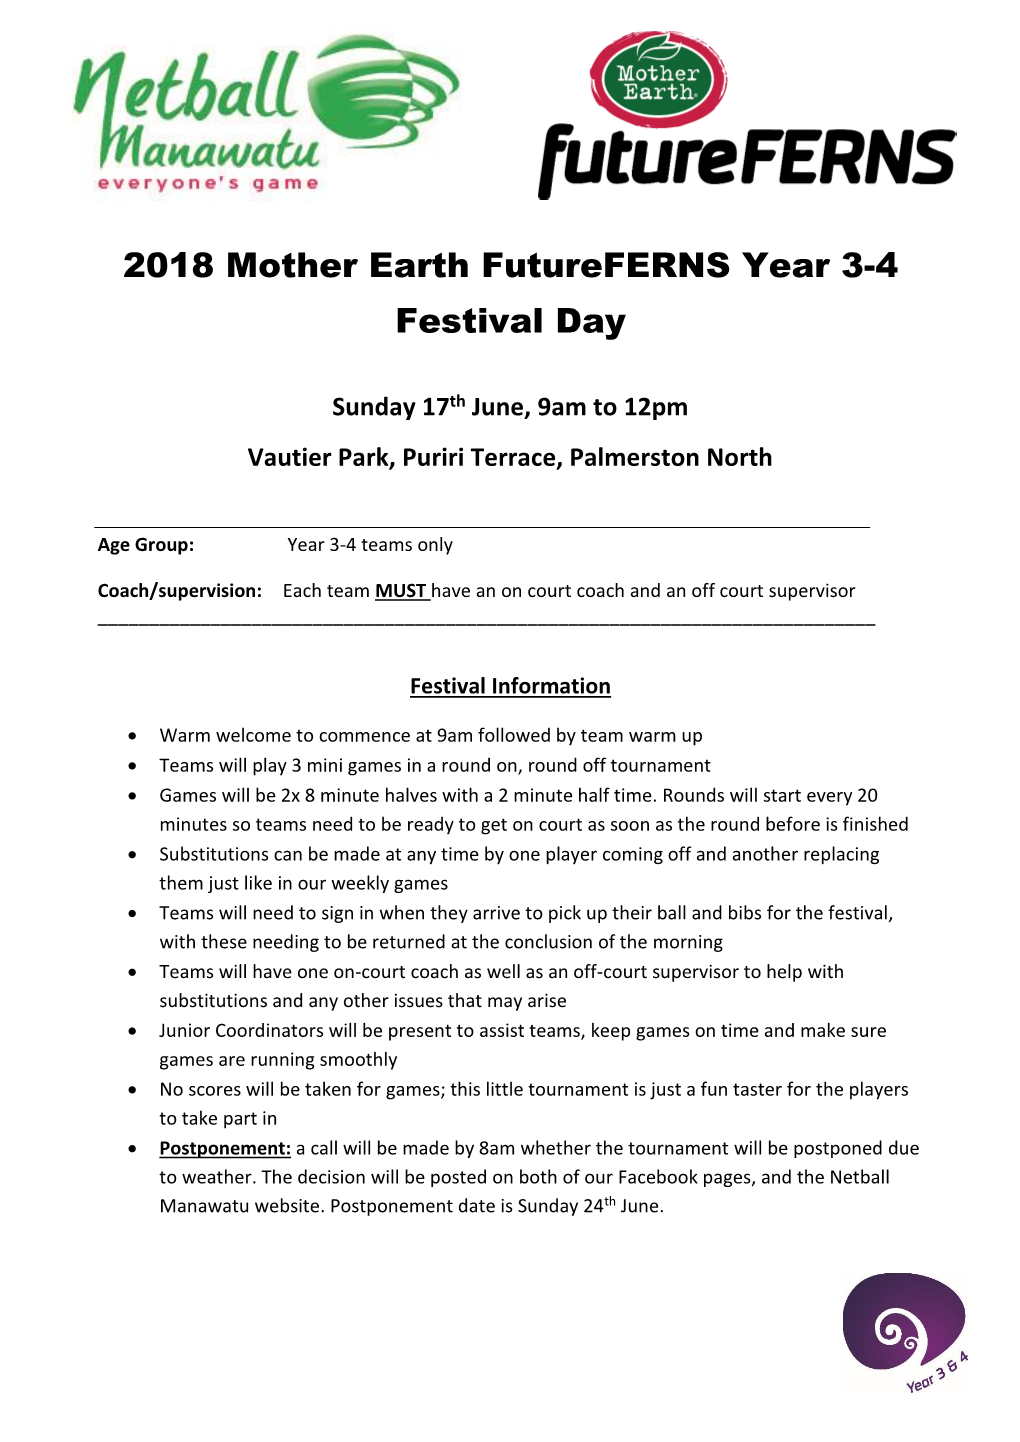 2018 Mother Earth Futureferns Year 3-4 Festival Day